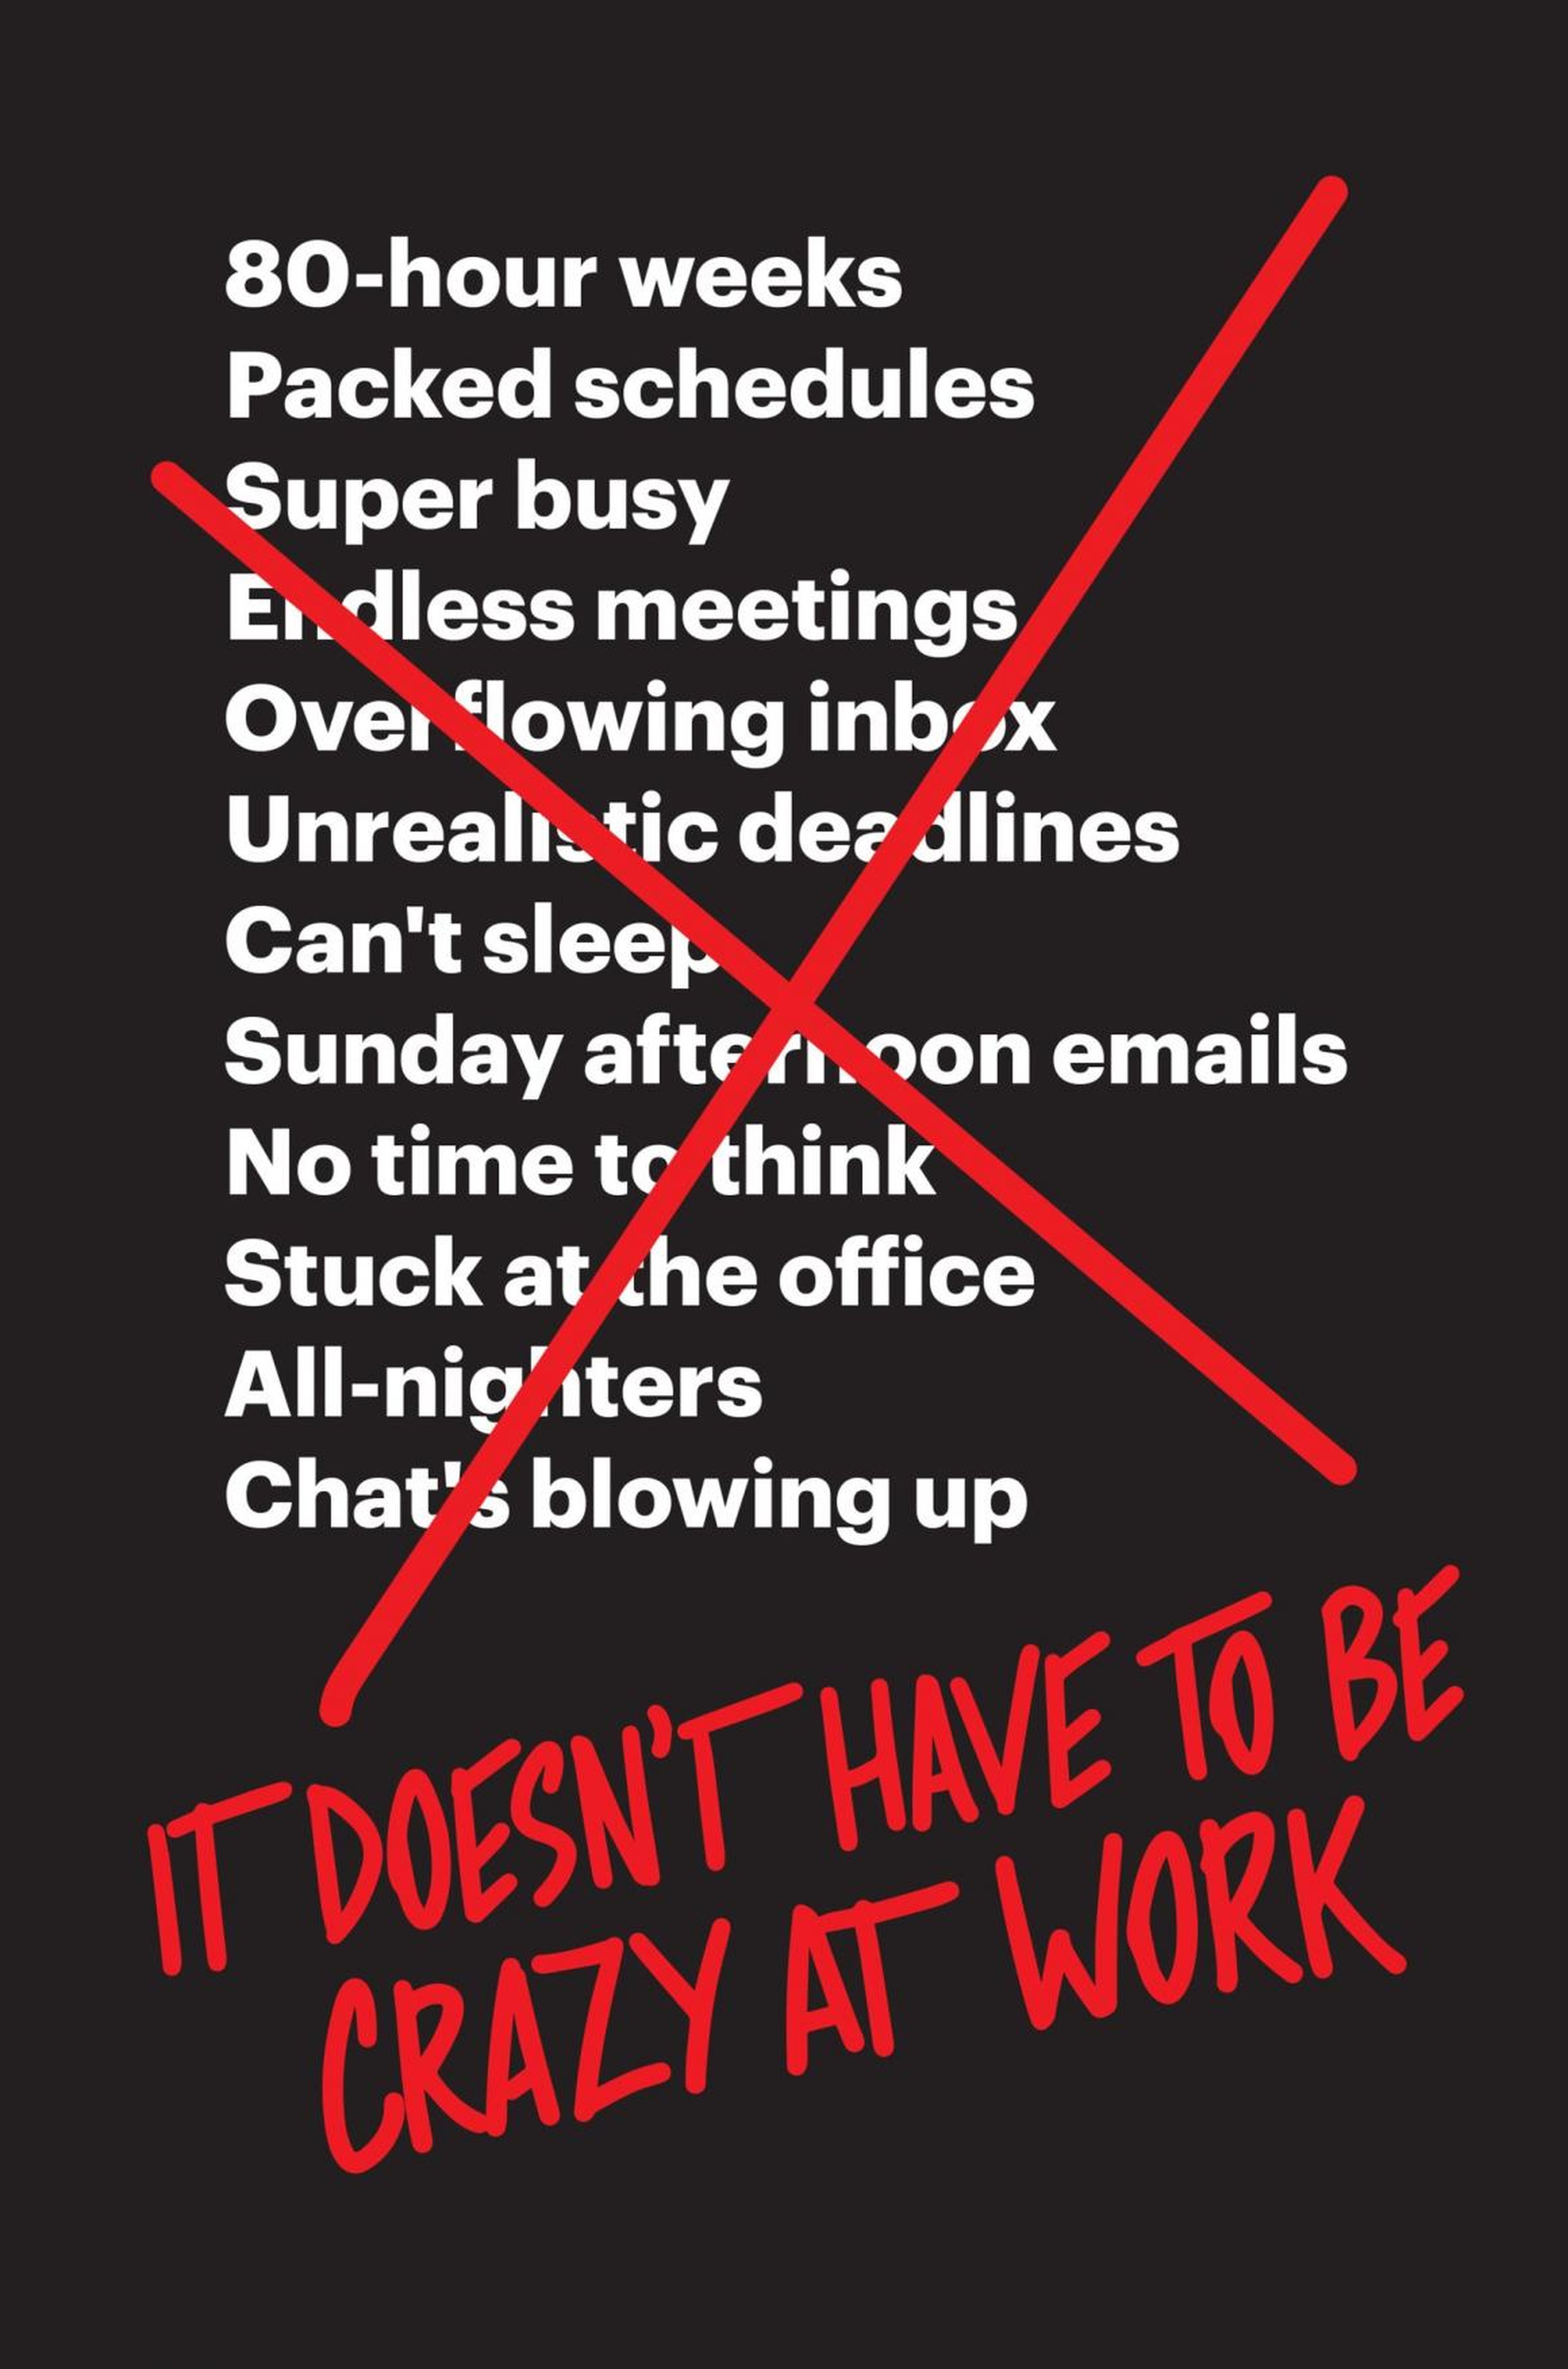 'It Doesn't Have to be Crazy at Work' by Jason Fried & David Heinemeier Hansson